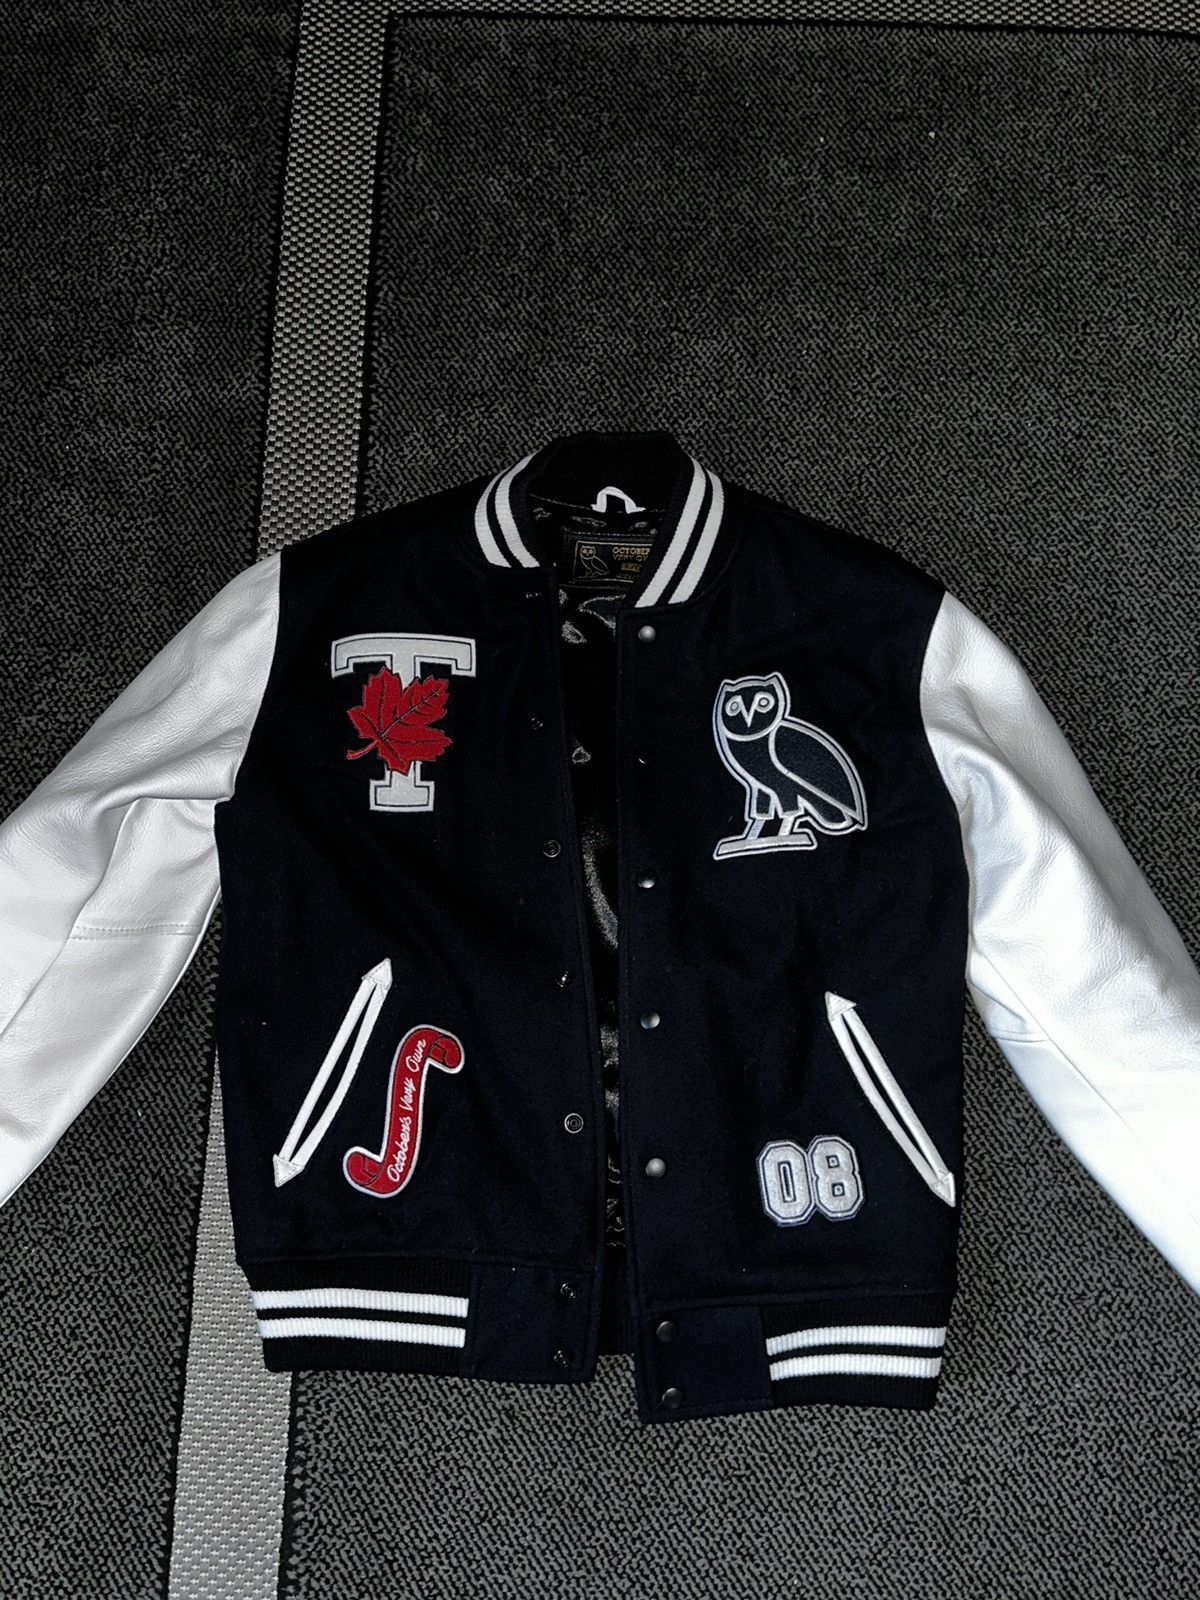 Octobers Very Own OVO x UOFT Varsity Jacket (Drop One) | Grailed